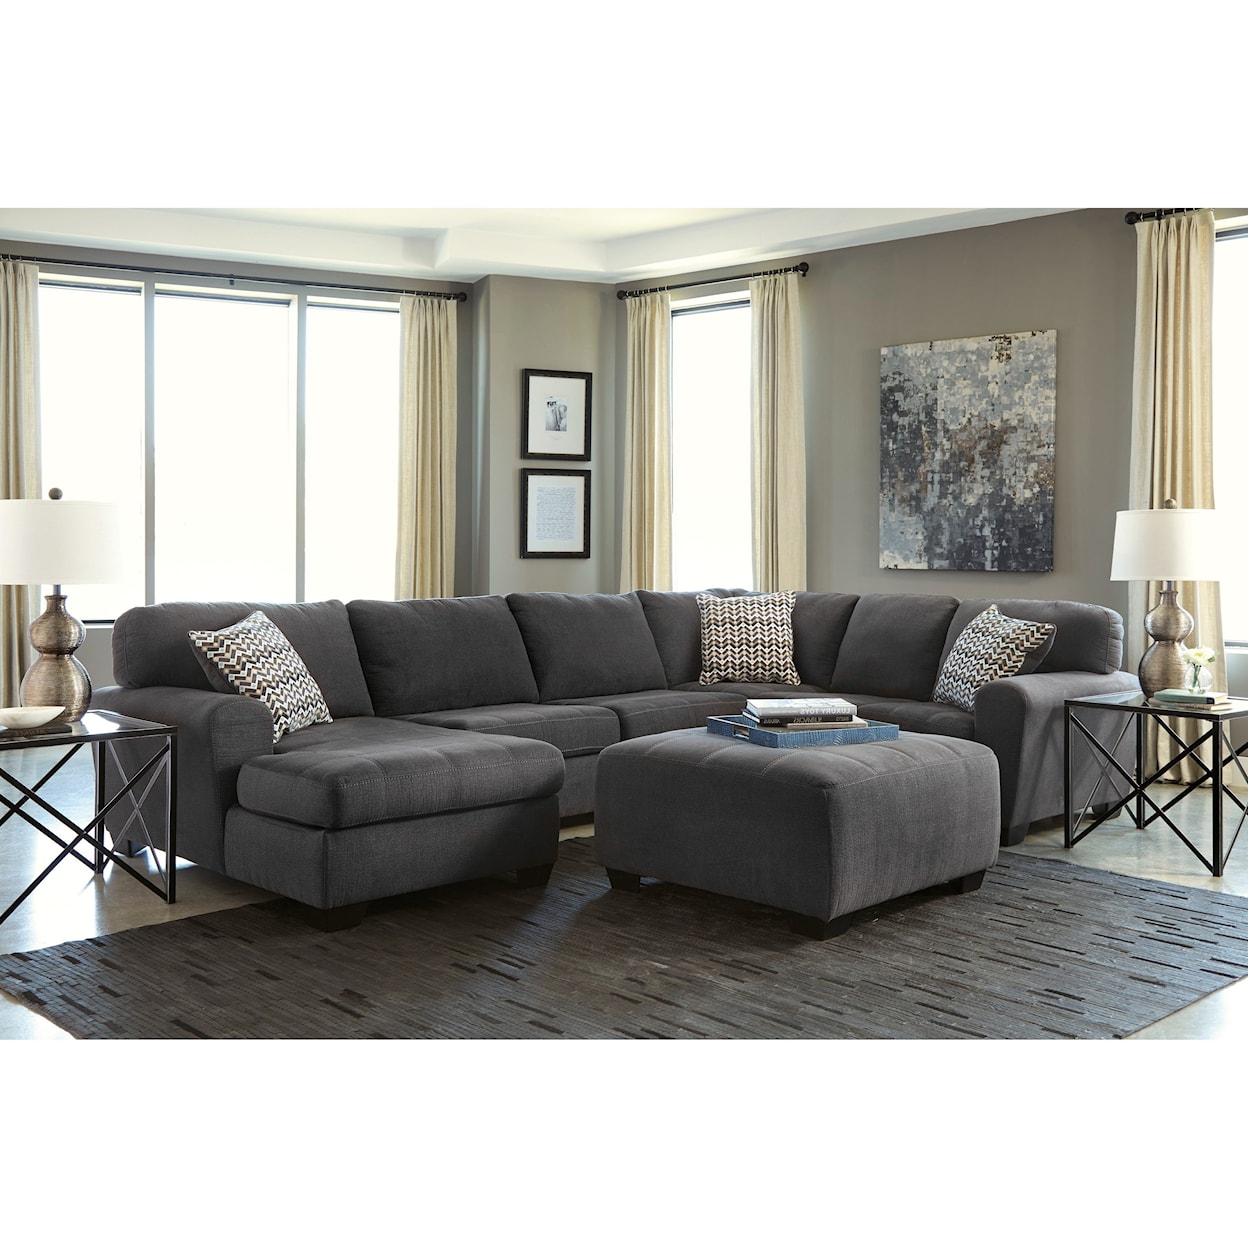 Benchcraft Ambee Living Room Group